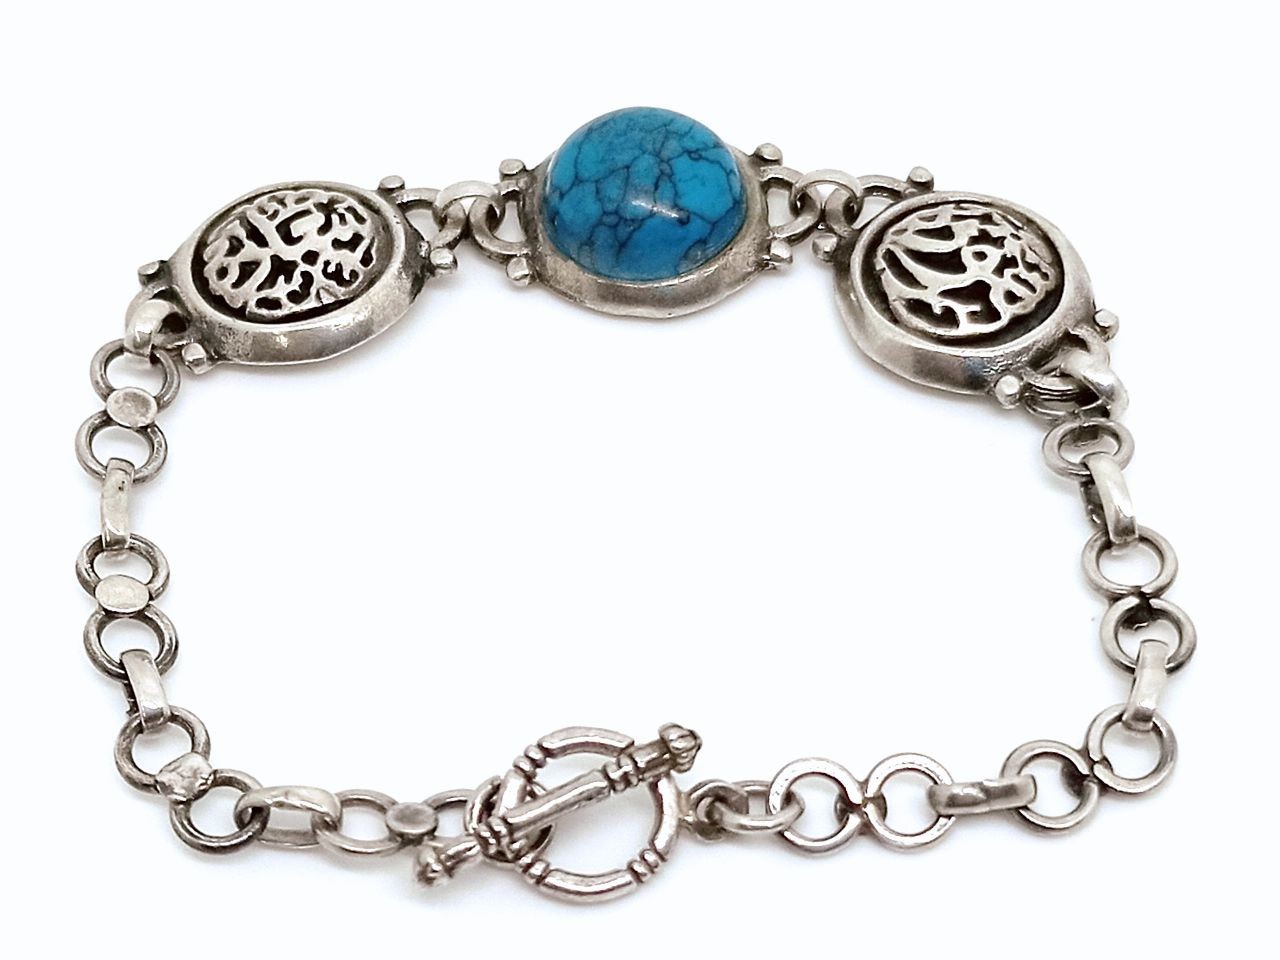 Arabic Silver bracelet with turquoise